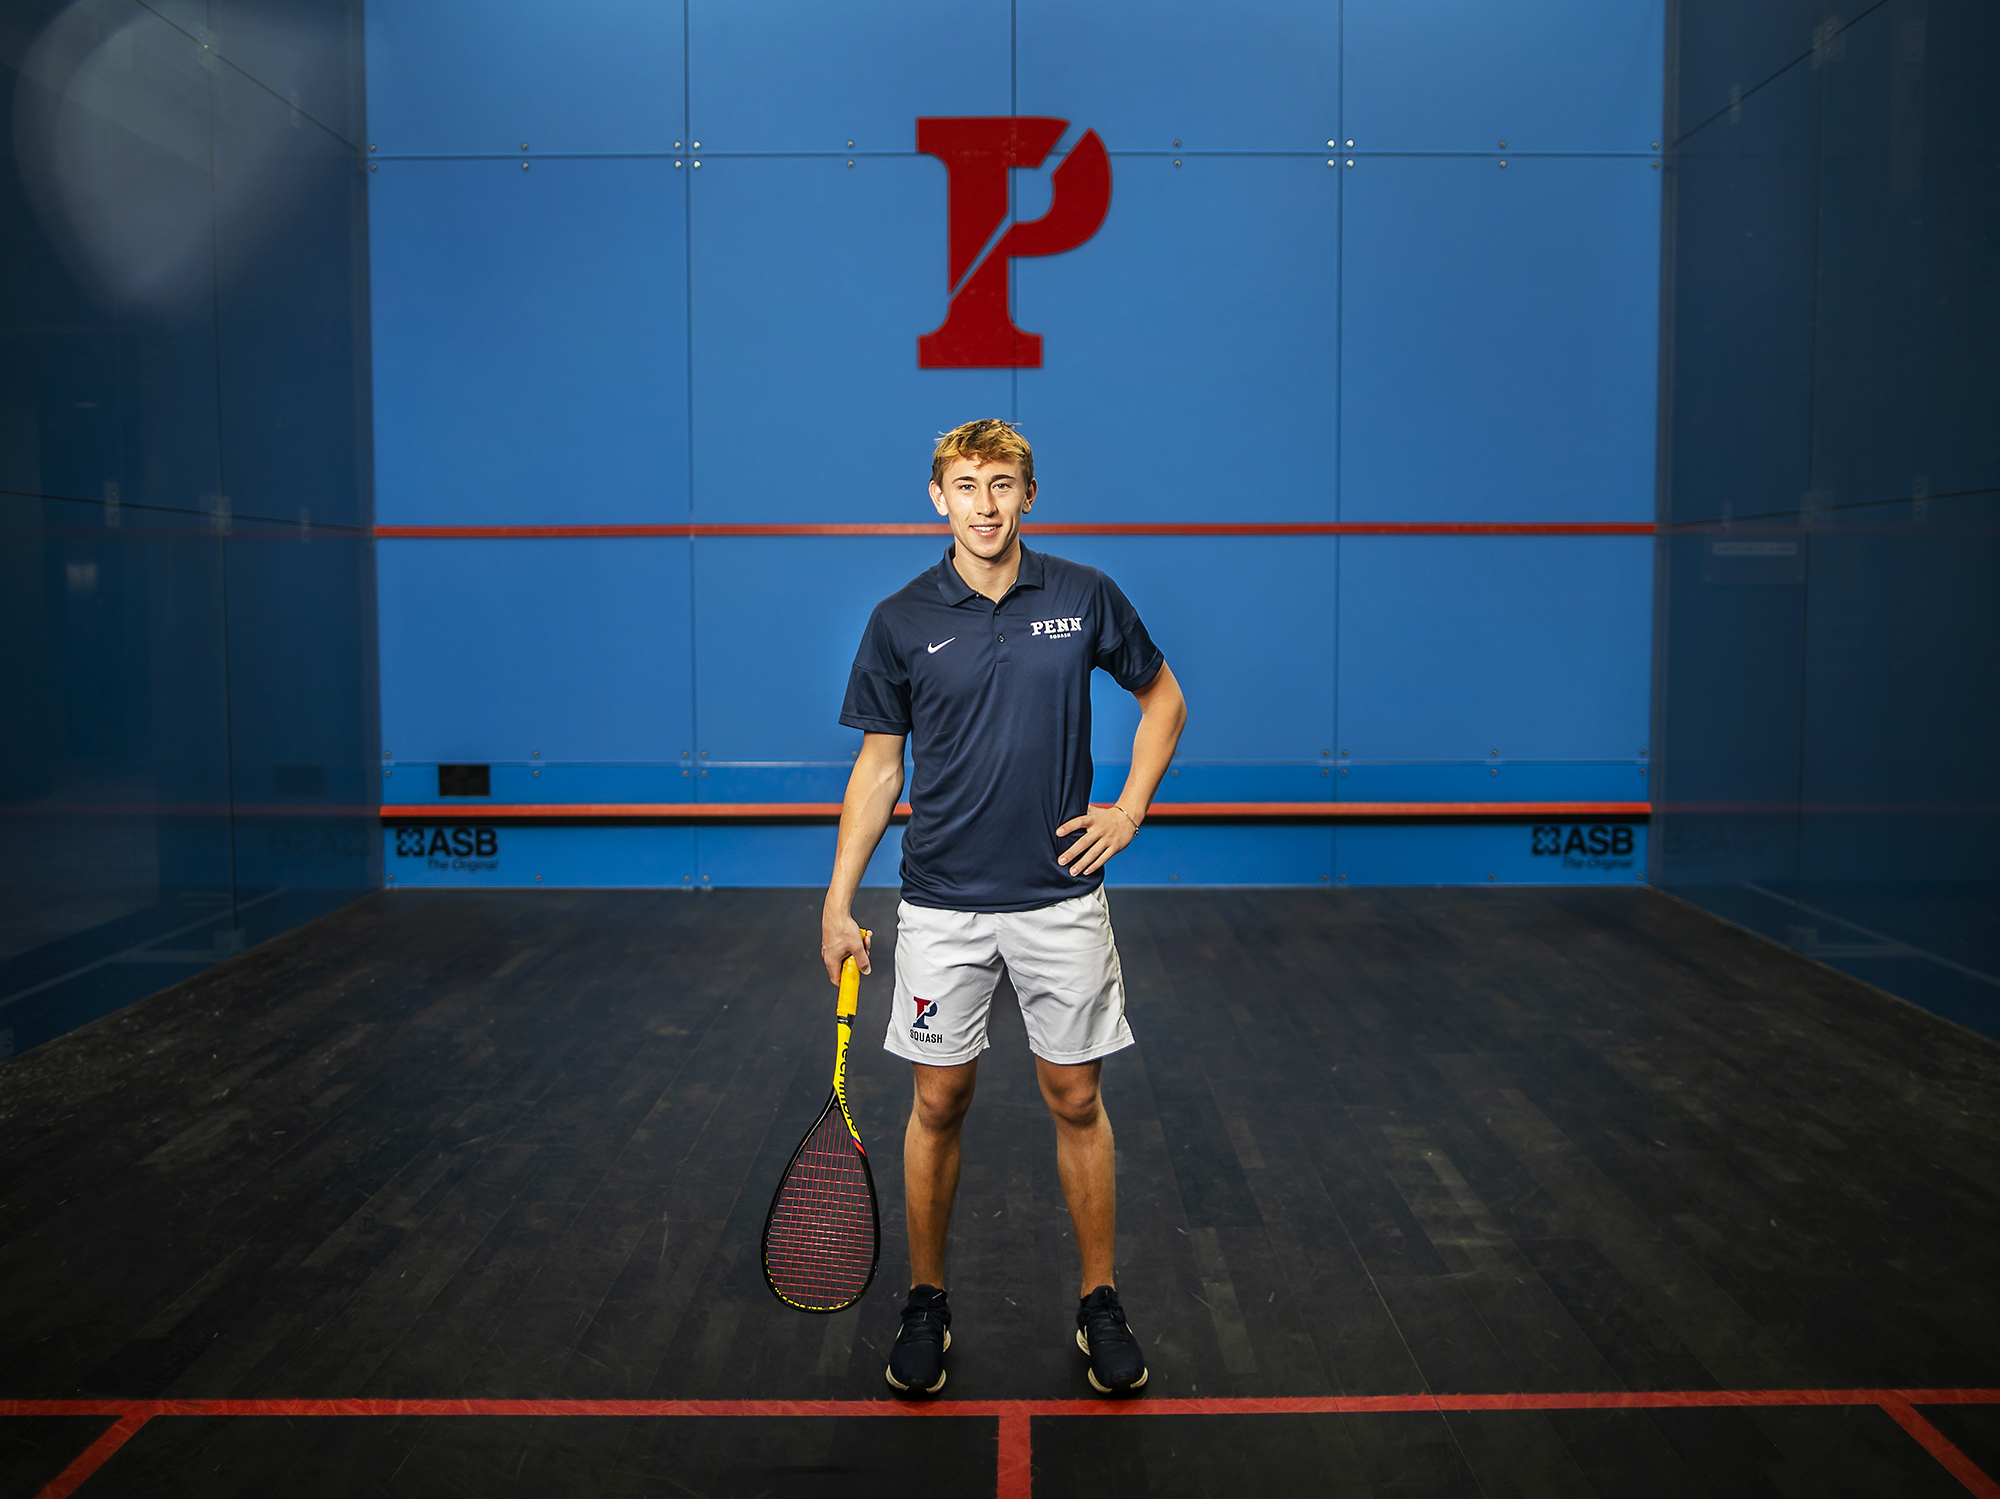 Andrew Douglas stands on the court at the Penn Squash Center with his racquet by his side.